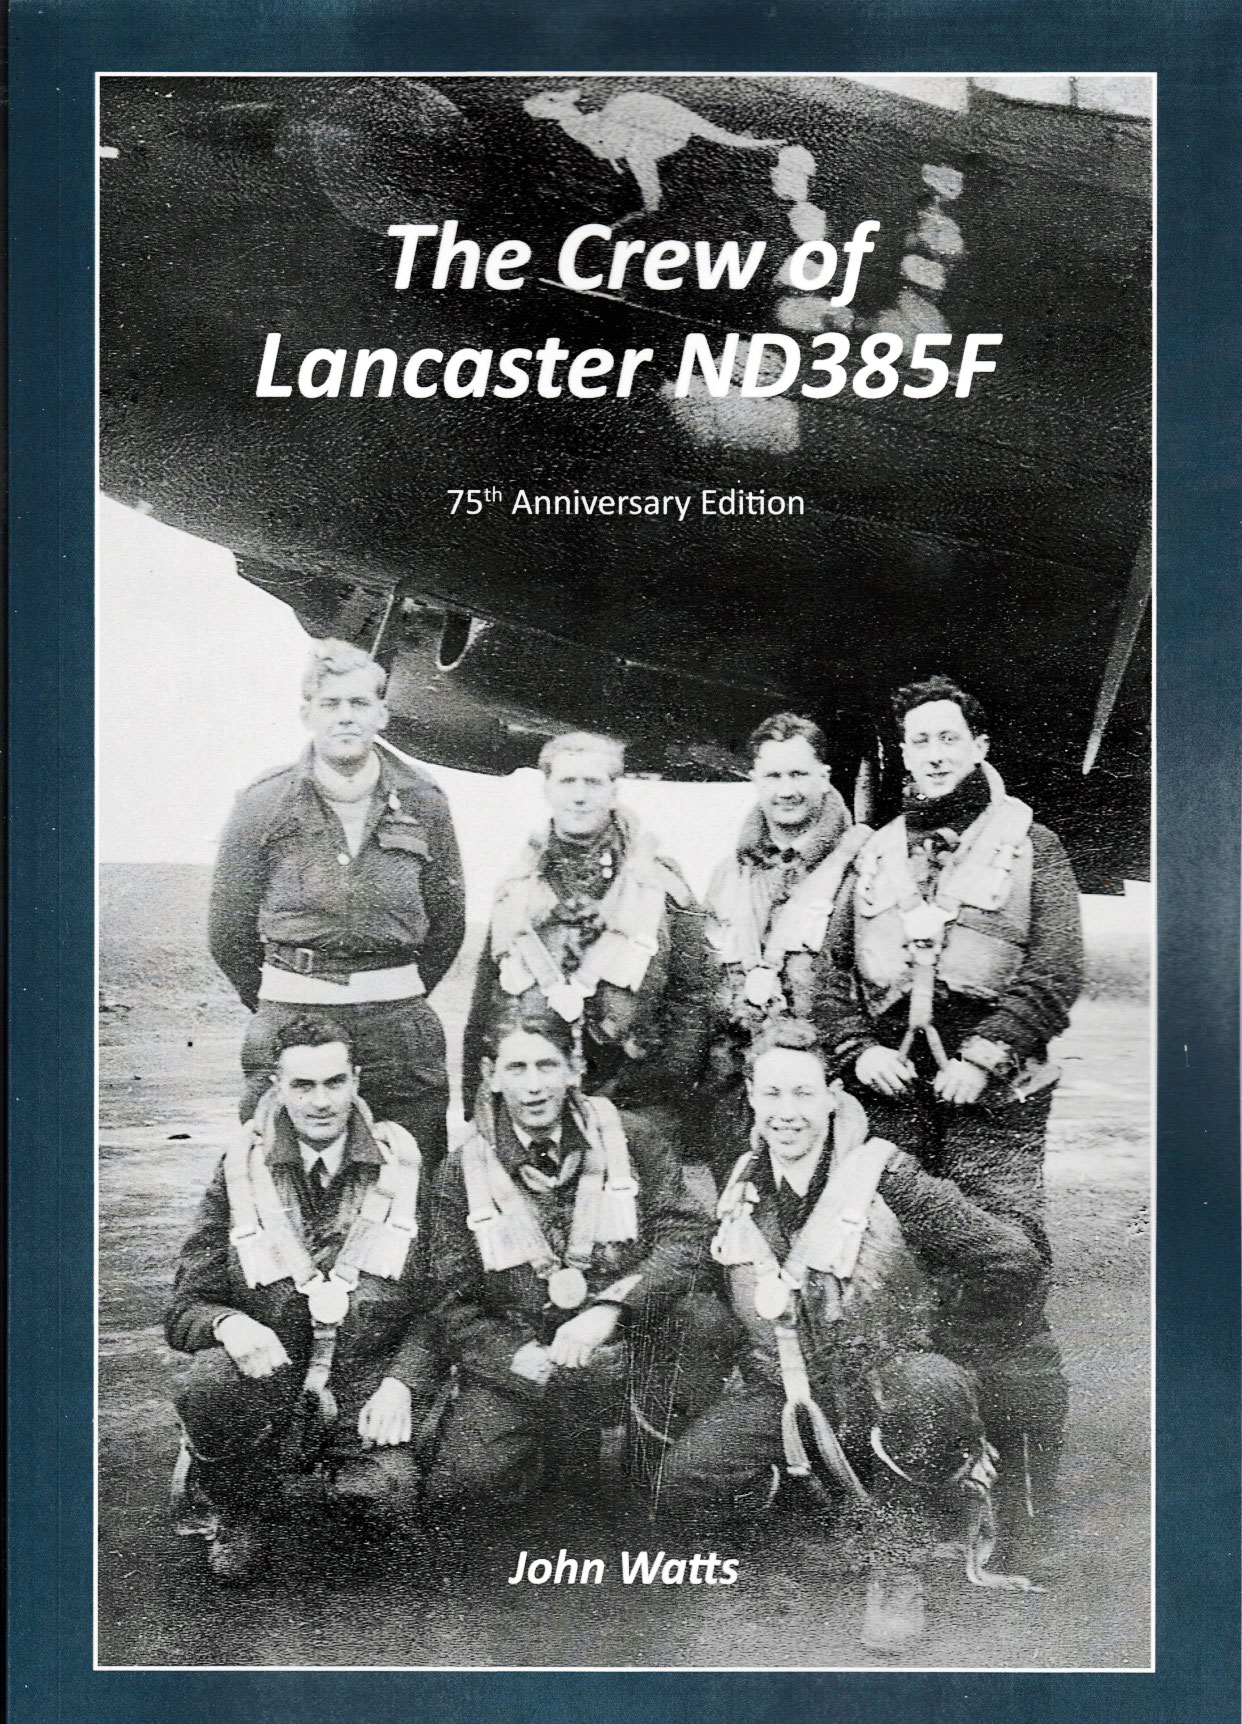 The Crew of Lancaster ND385F